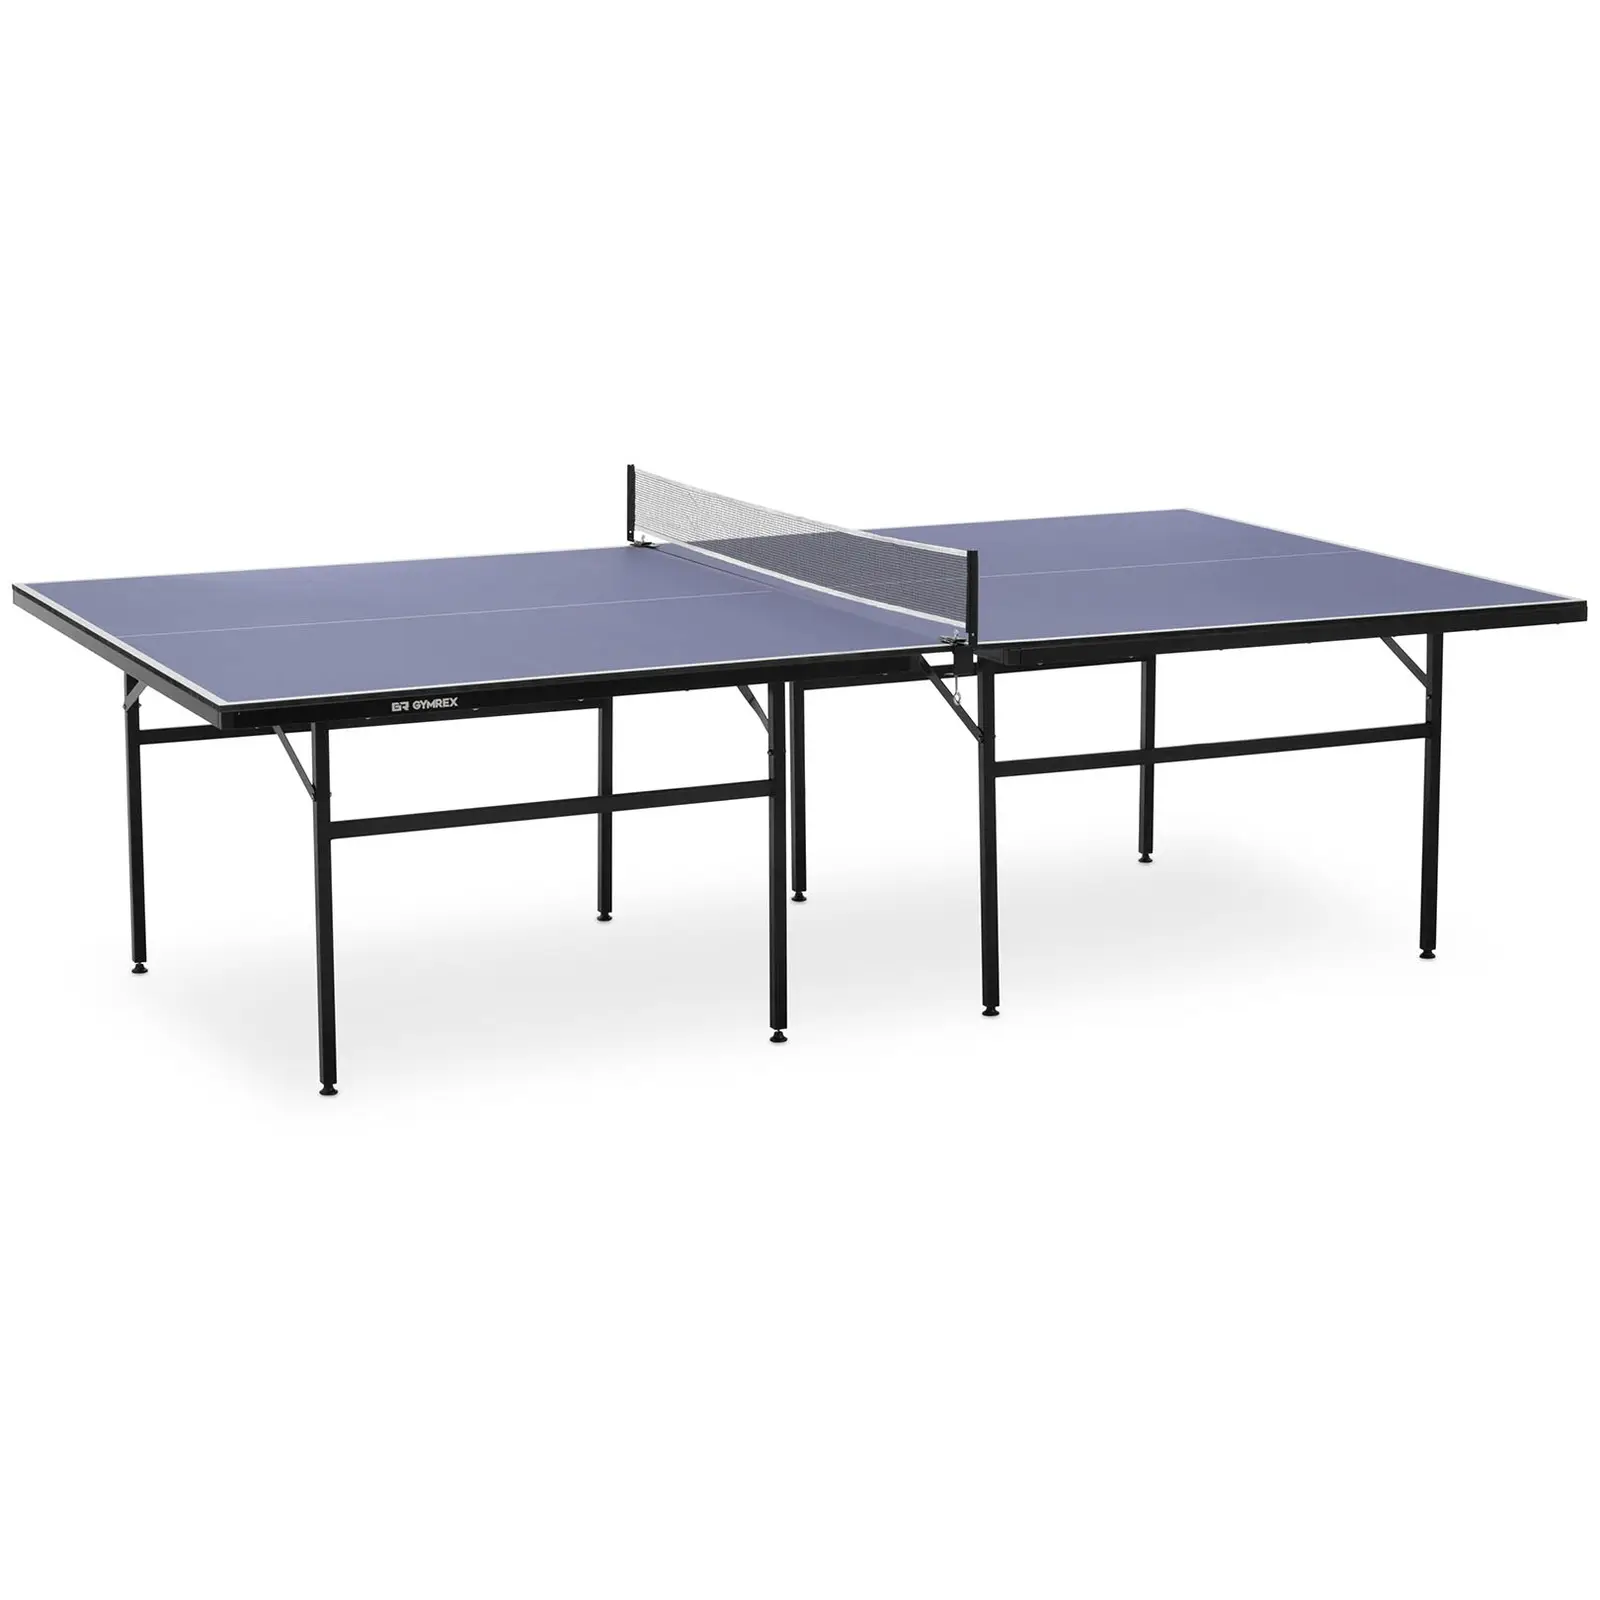 Table Tennis Table - indoor - foldable